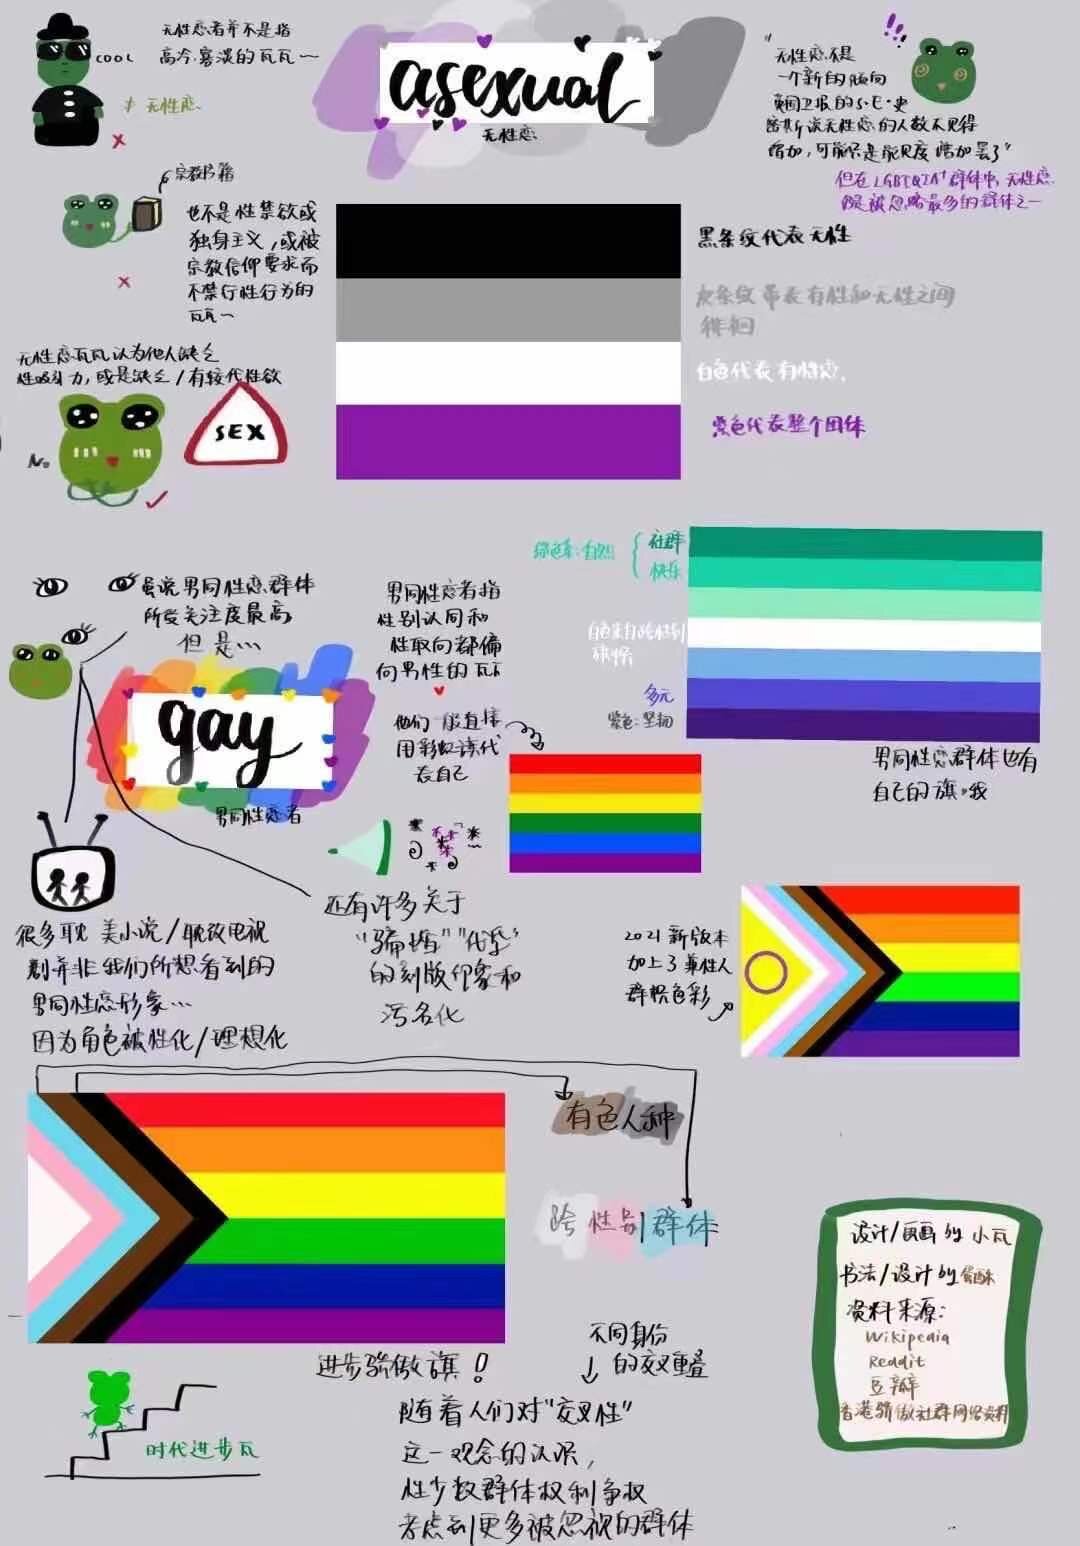 Jiyoung: In lieu of any personal photos alongside this week's episode, here are some useful LGBTQIA resources in Chinese [5].